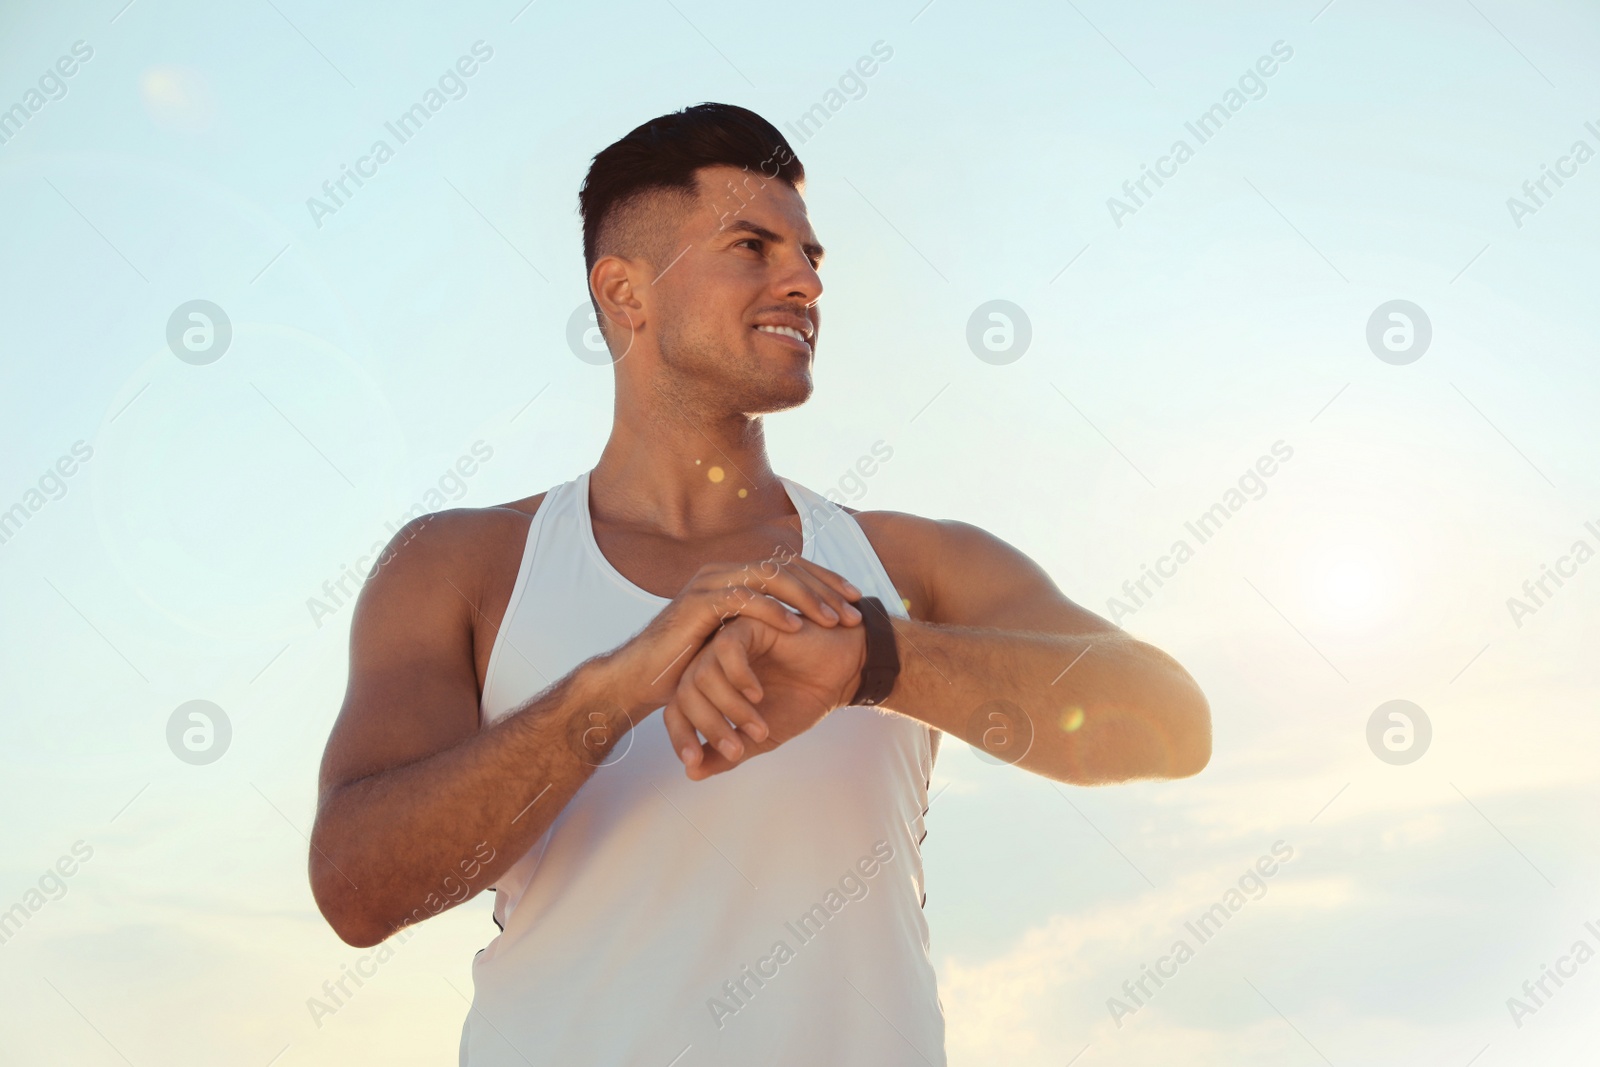 Photo of Man with athletic body checking fitness bracelet outdoors